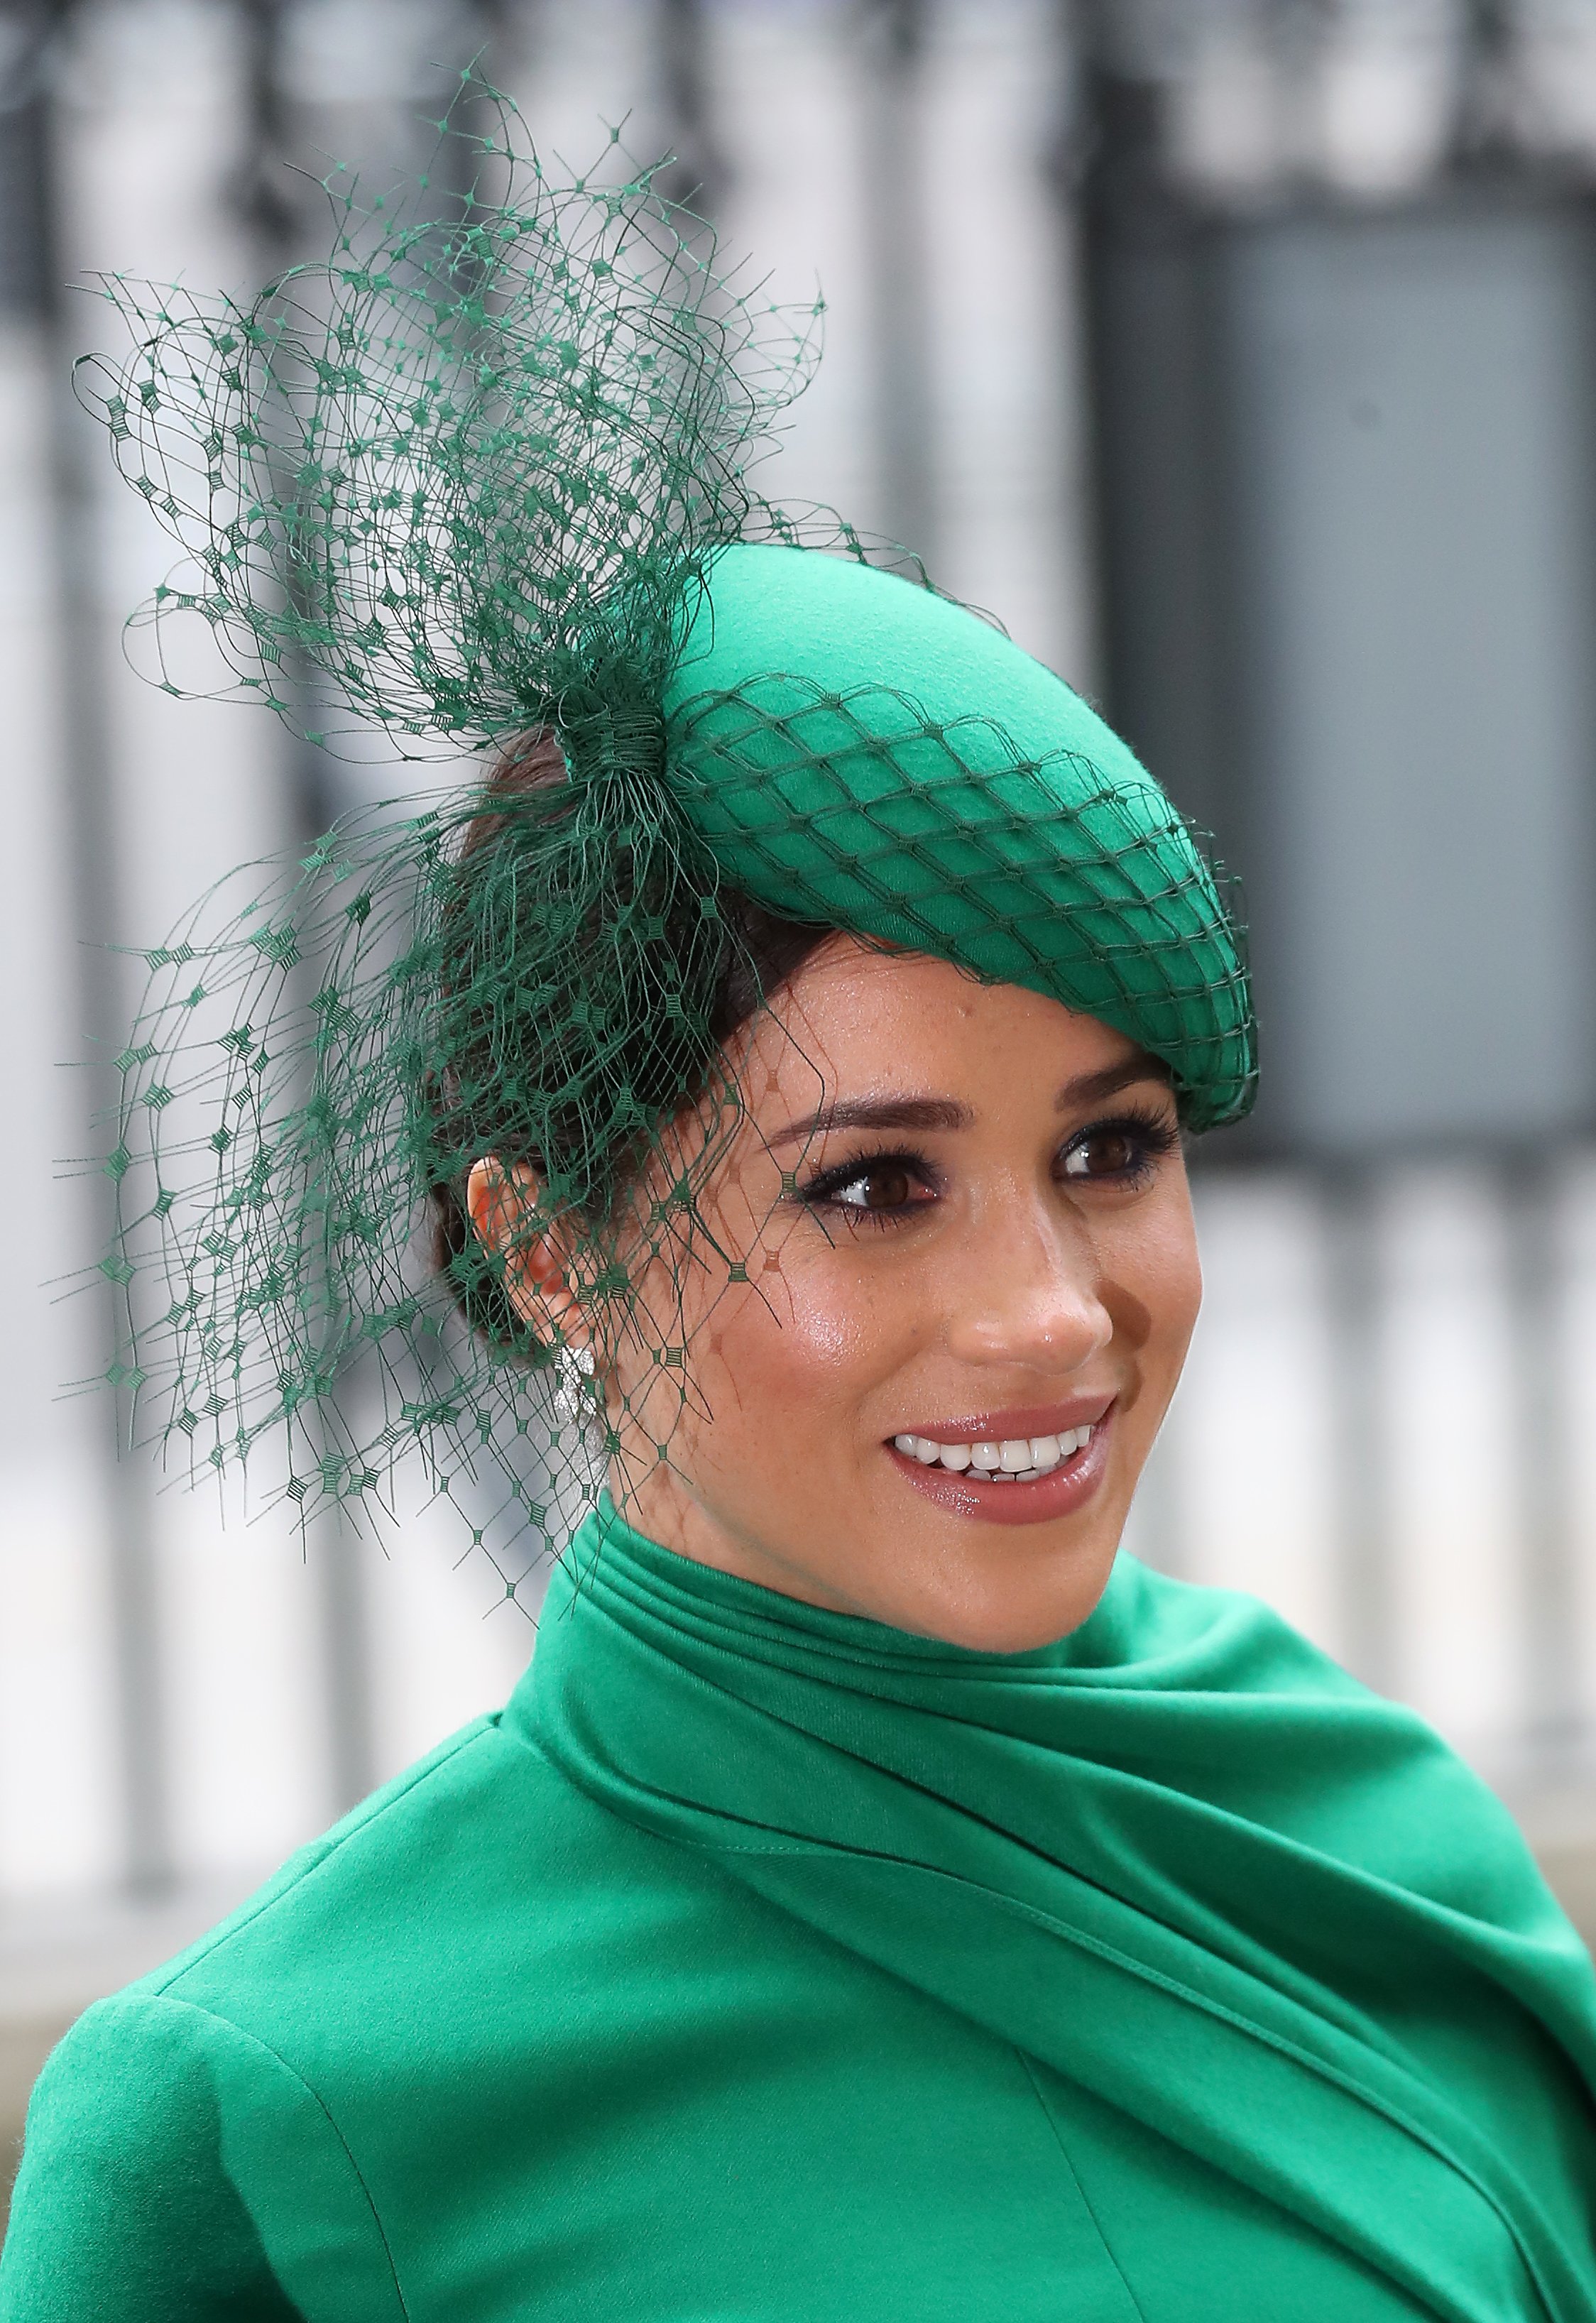 Meghan Markle attends the Commonwealth Day Service 2020 on March 09, 2020, in London, England. | Source: Getty Images.